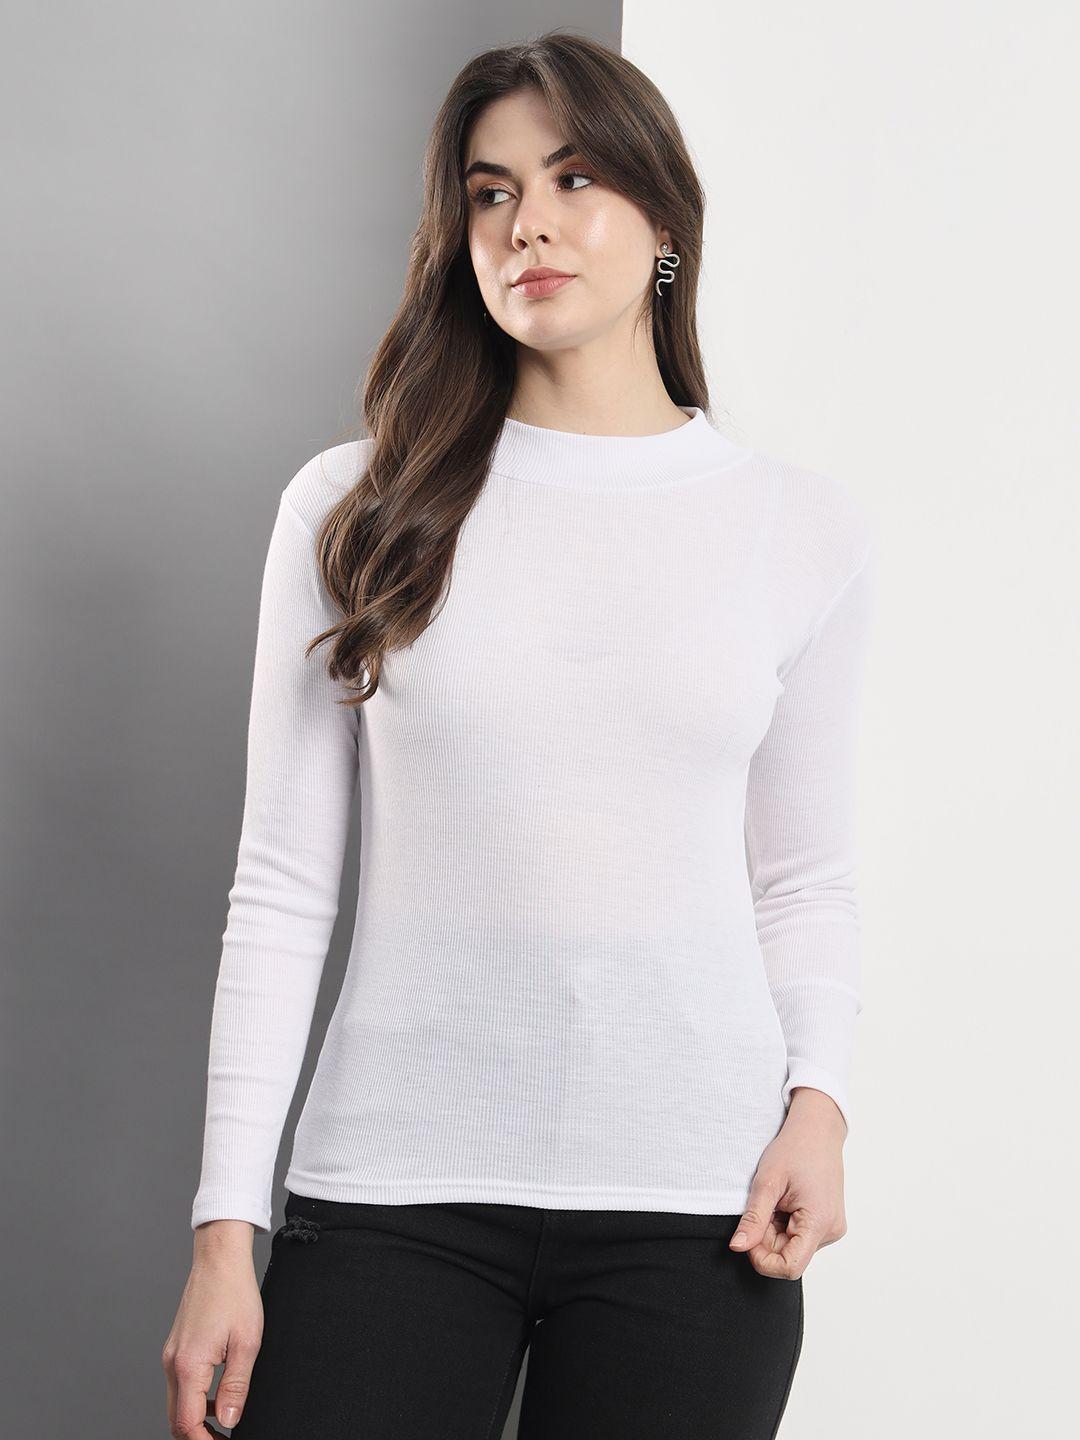 q-rious round neck long sleeves top